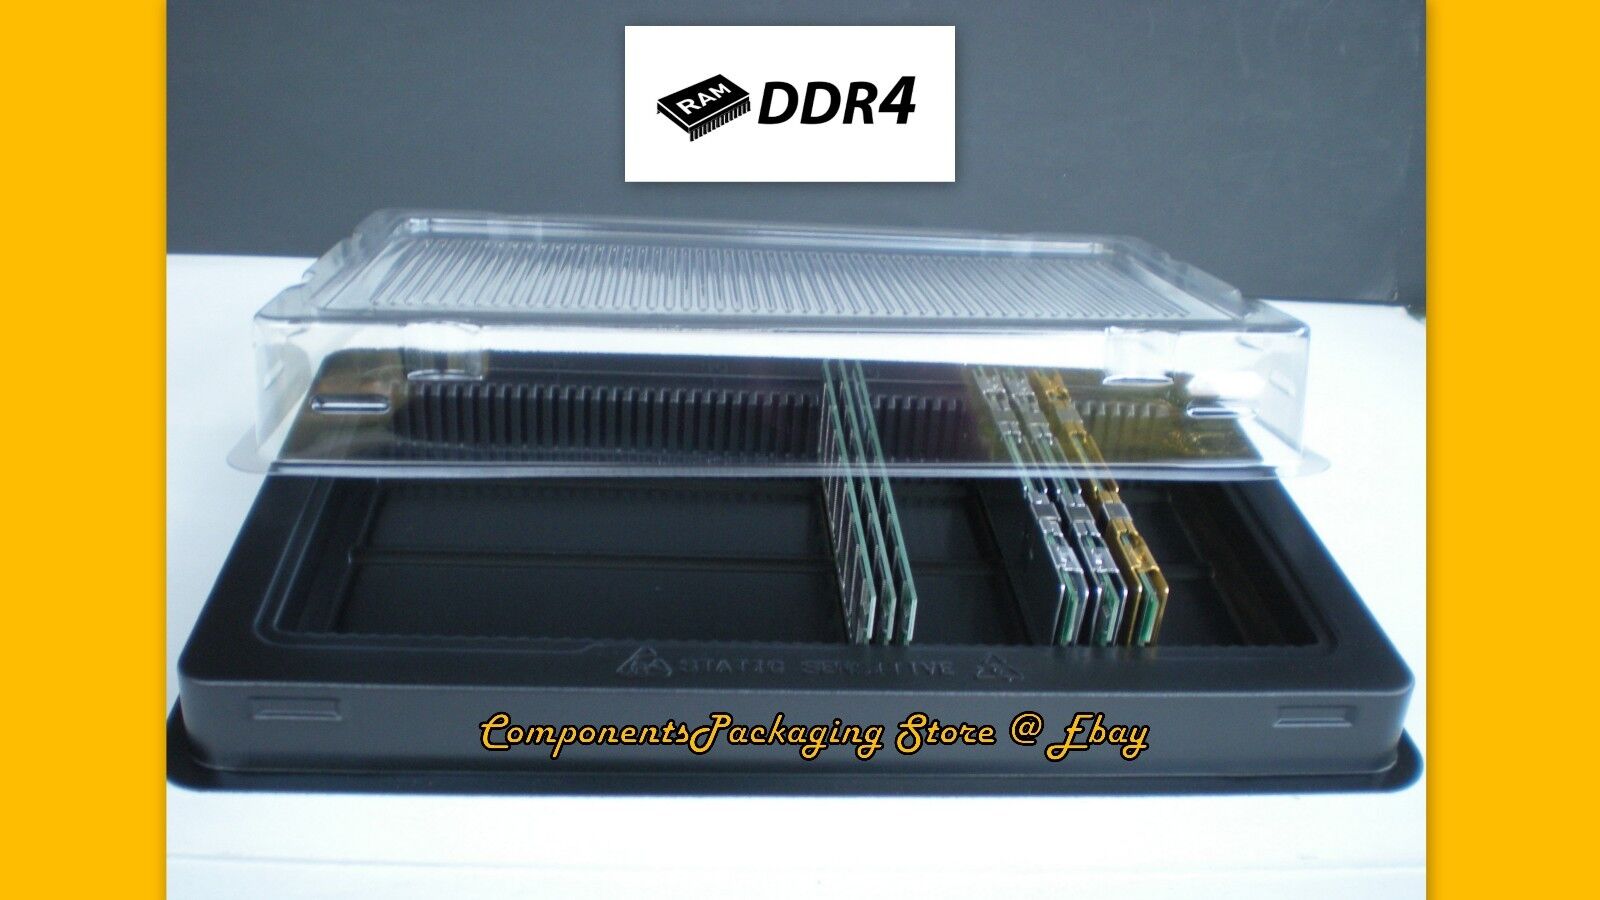 5 DDR Memory Tray Case for Desktop PC Server DIMM RAM Modules - Fits 250 New